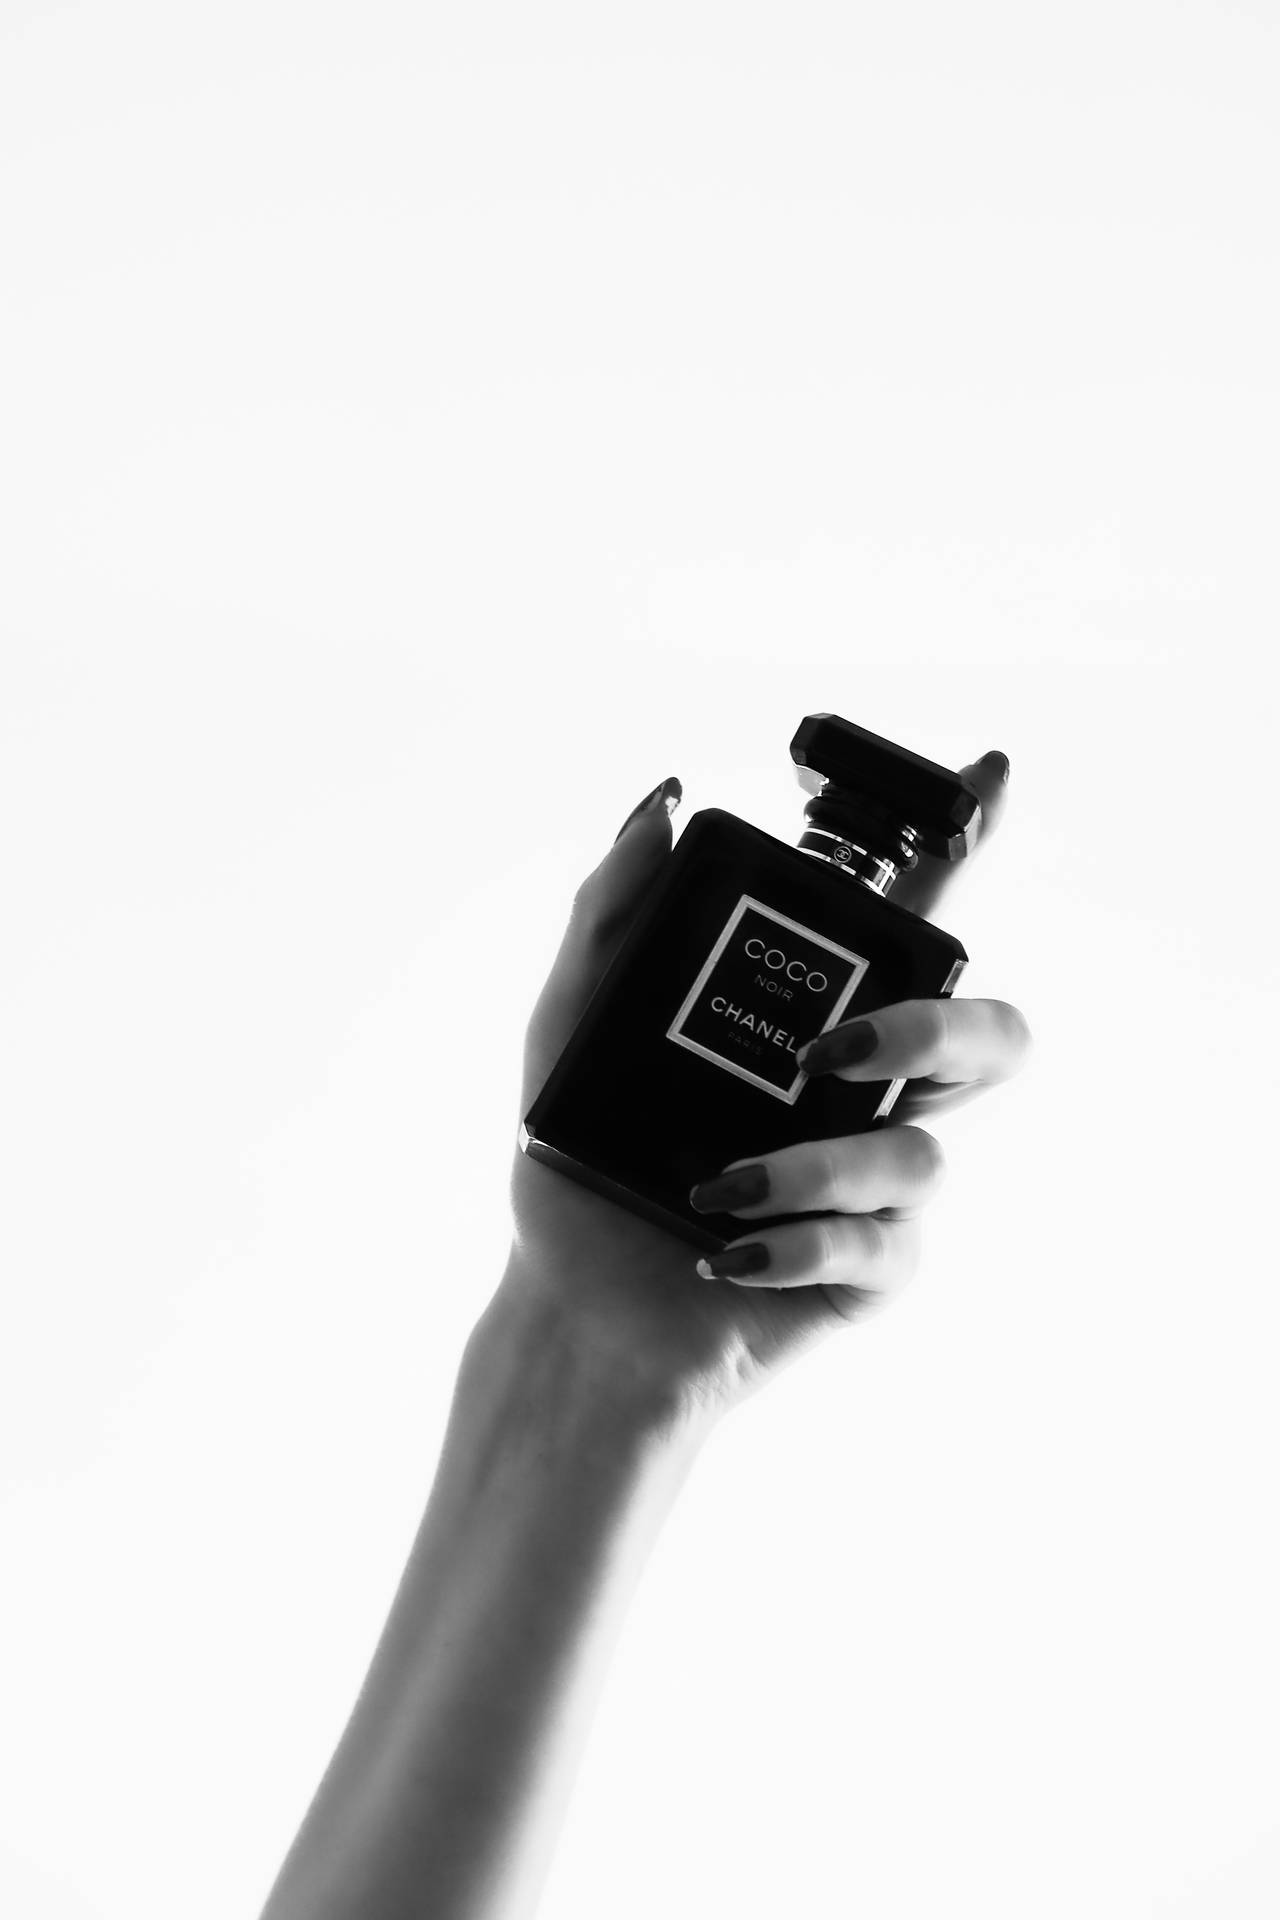 Chanel Noir With Hand Grayscale Background